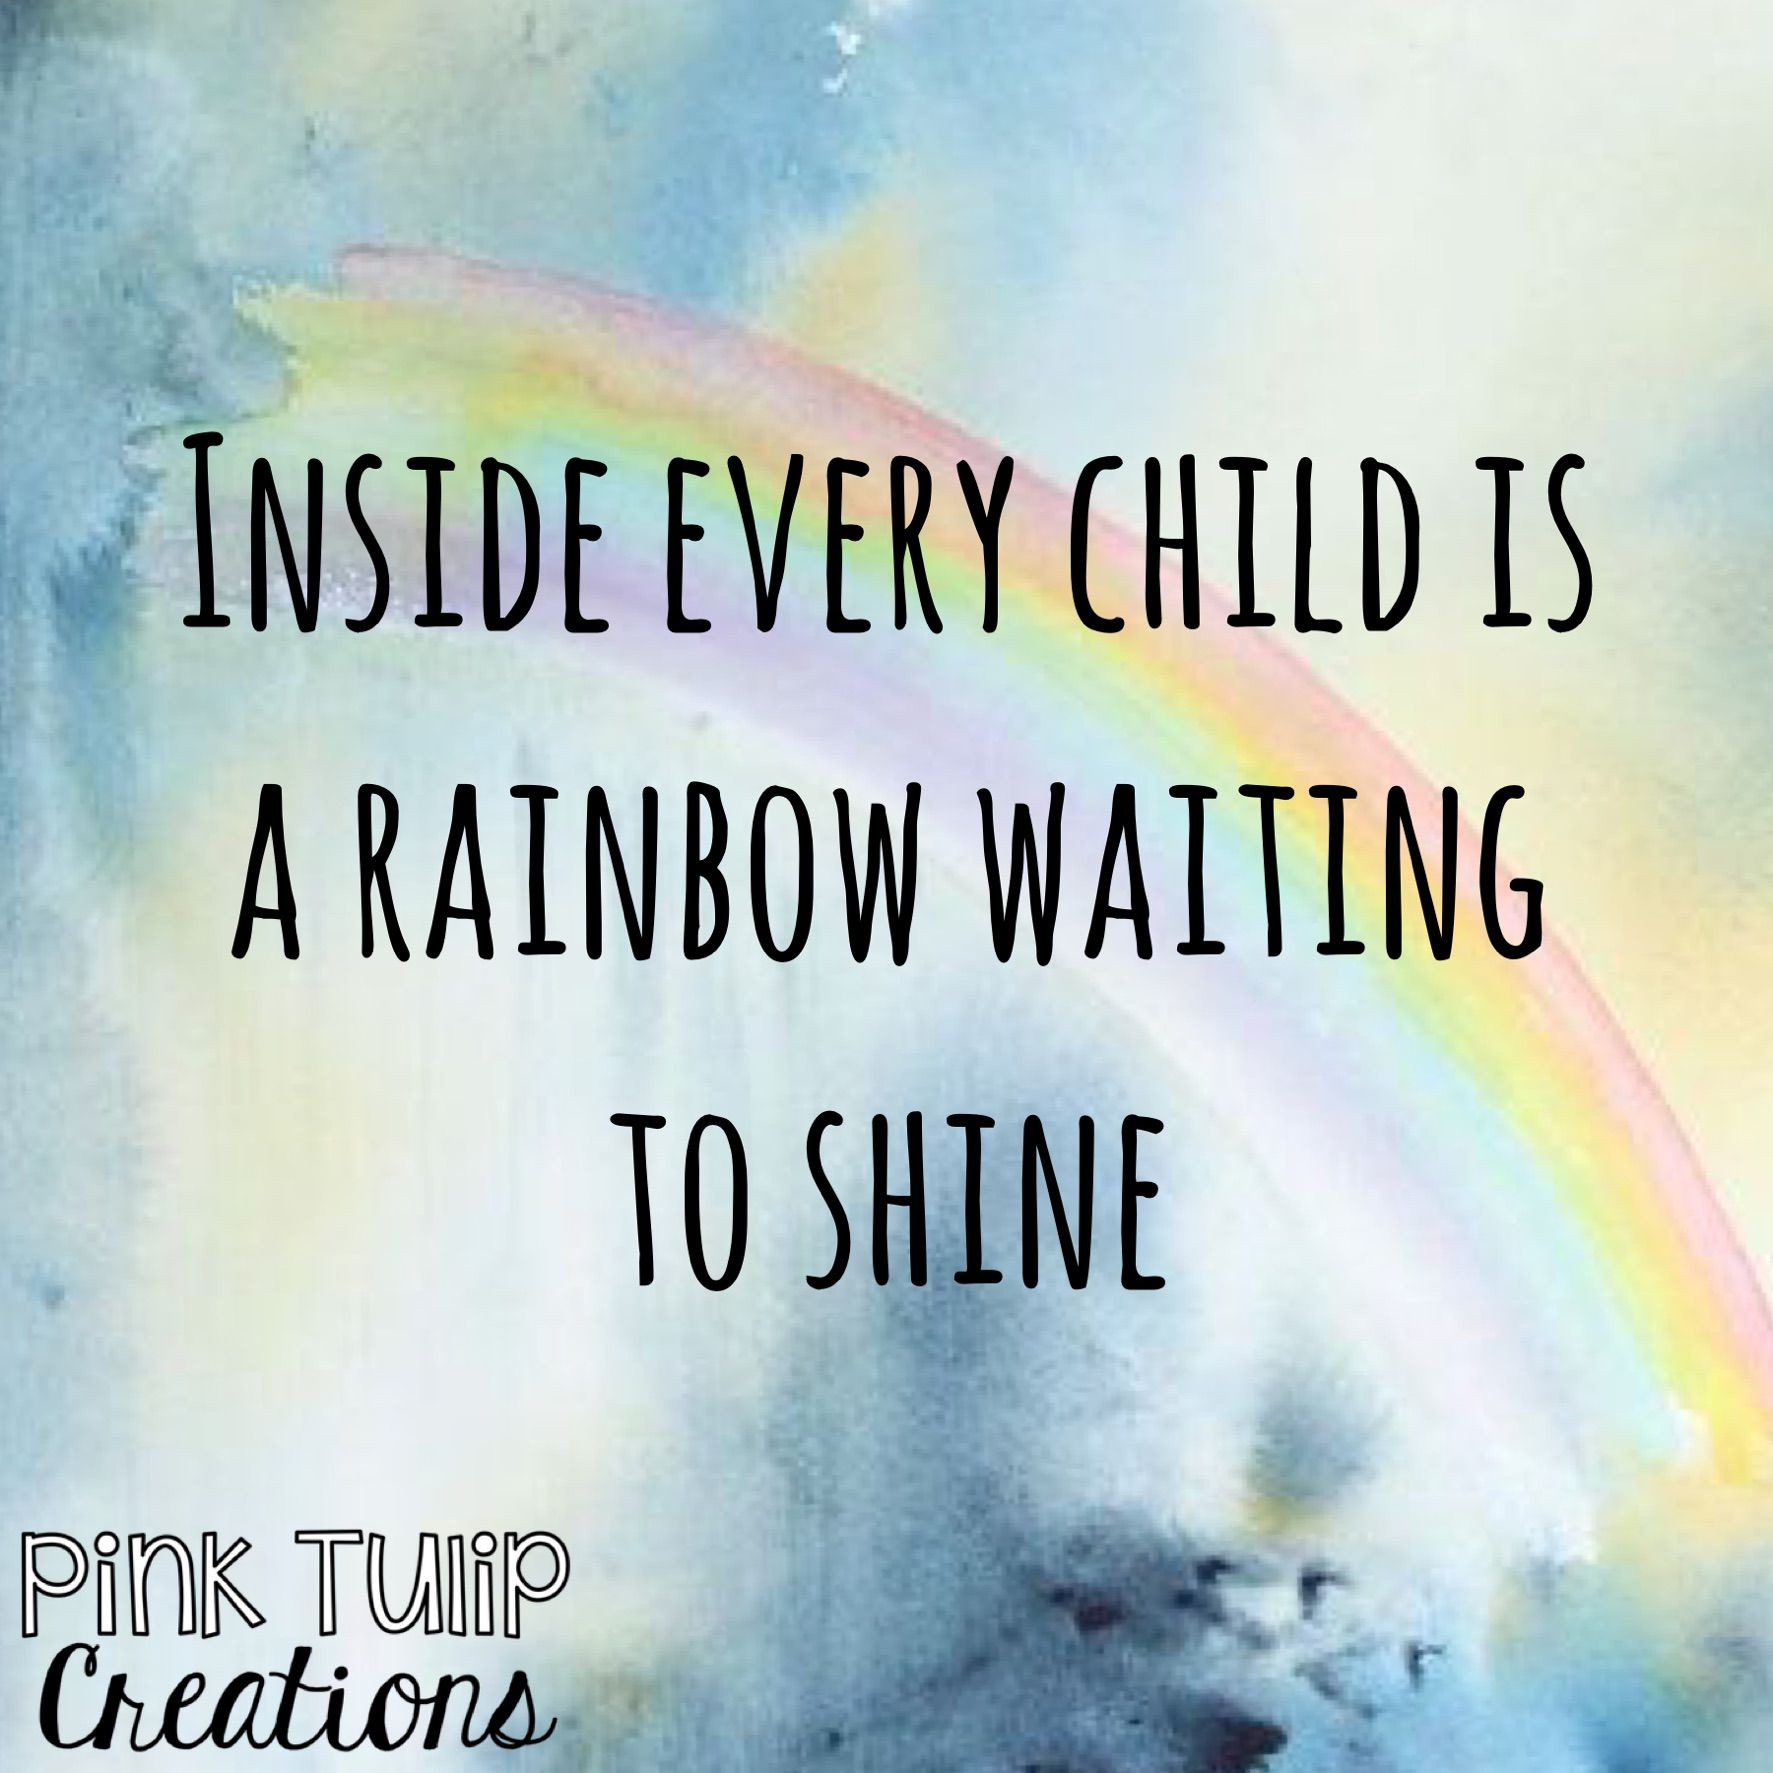 Children Education Quotes
 Inside every child is a rainbow waiting to shine